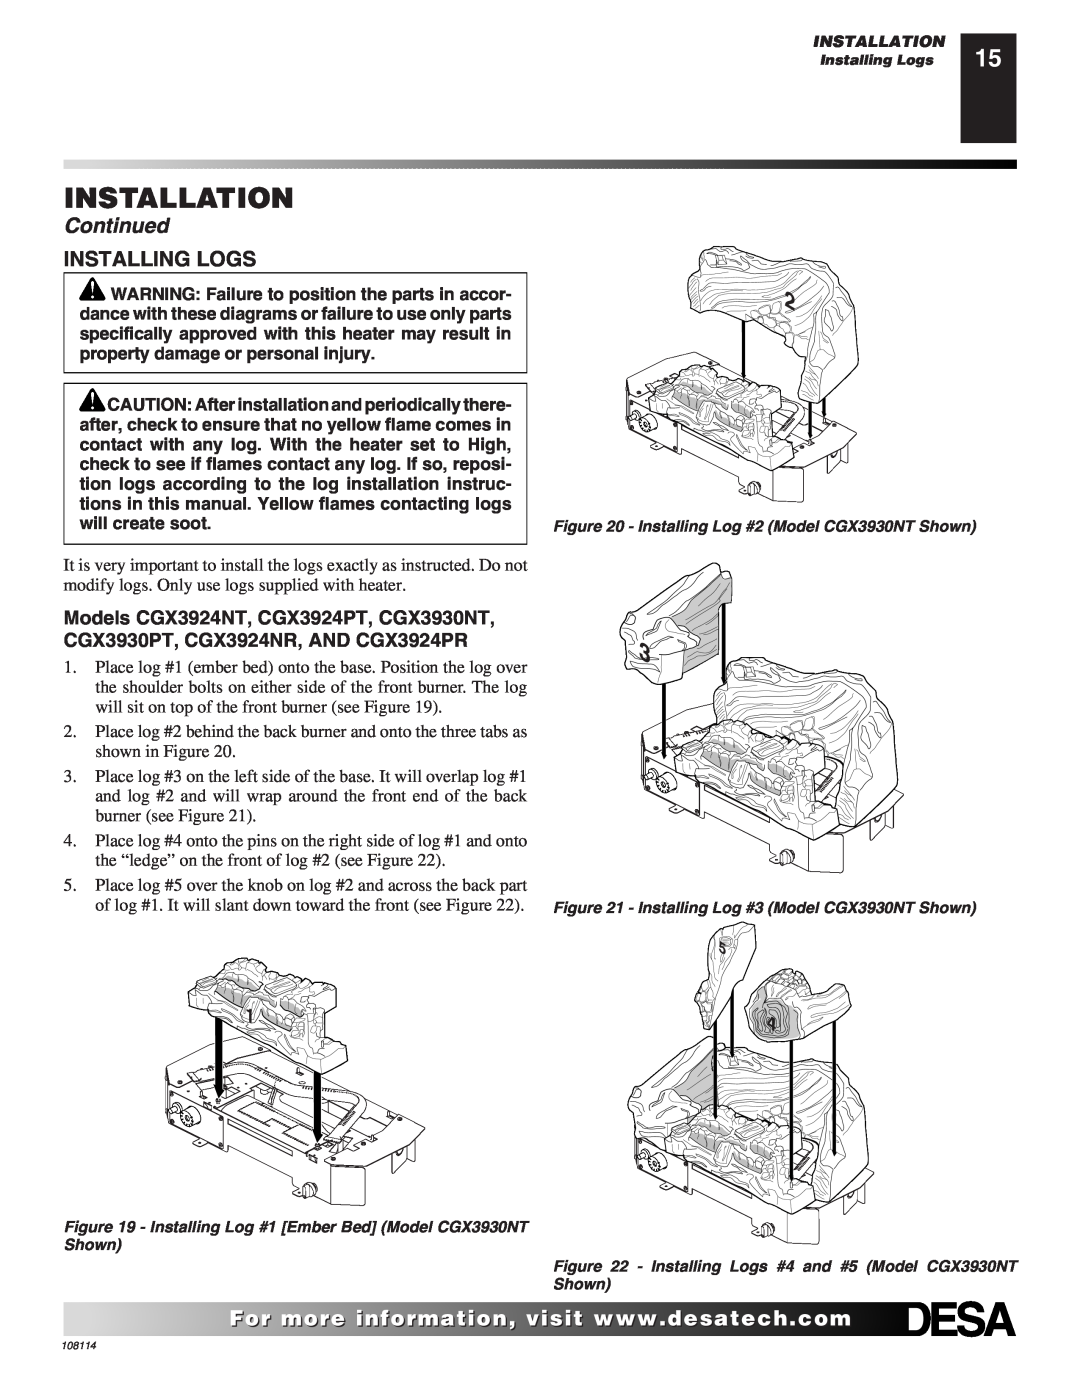 Desa INTERNATIONAL UNVENTED (VENT-FREE) GAS LOG HEATER installation manual Installation, Continued, Installing Logs 